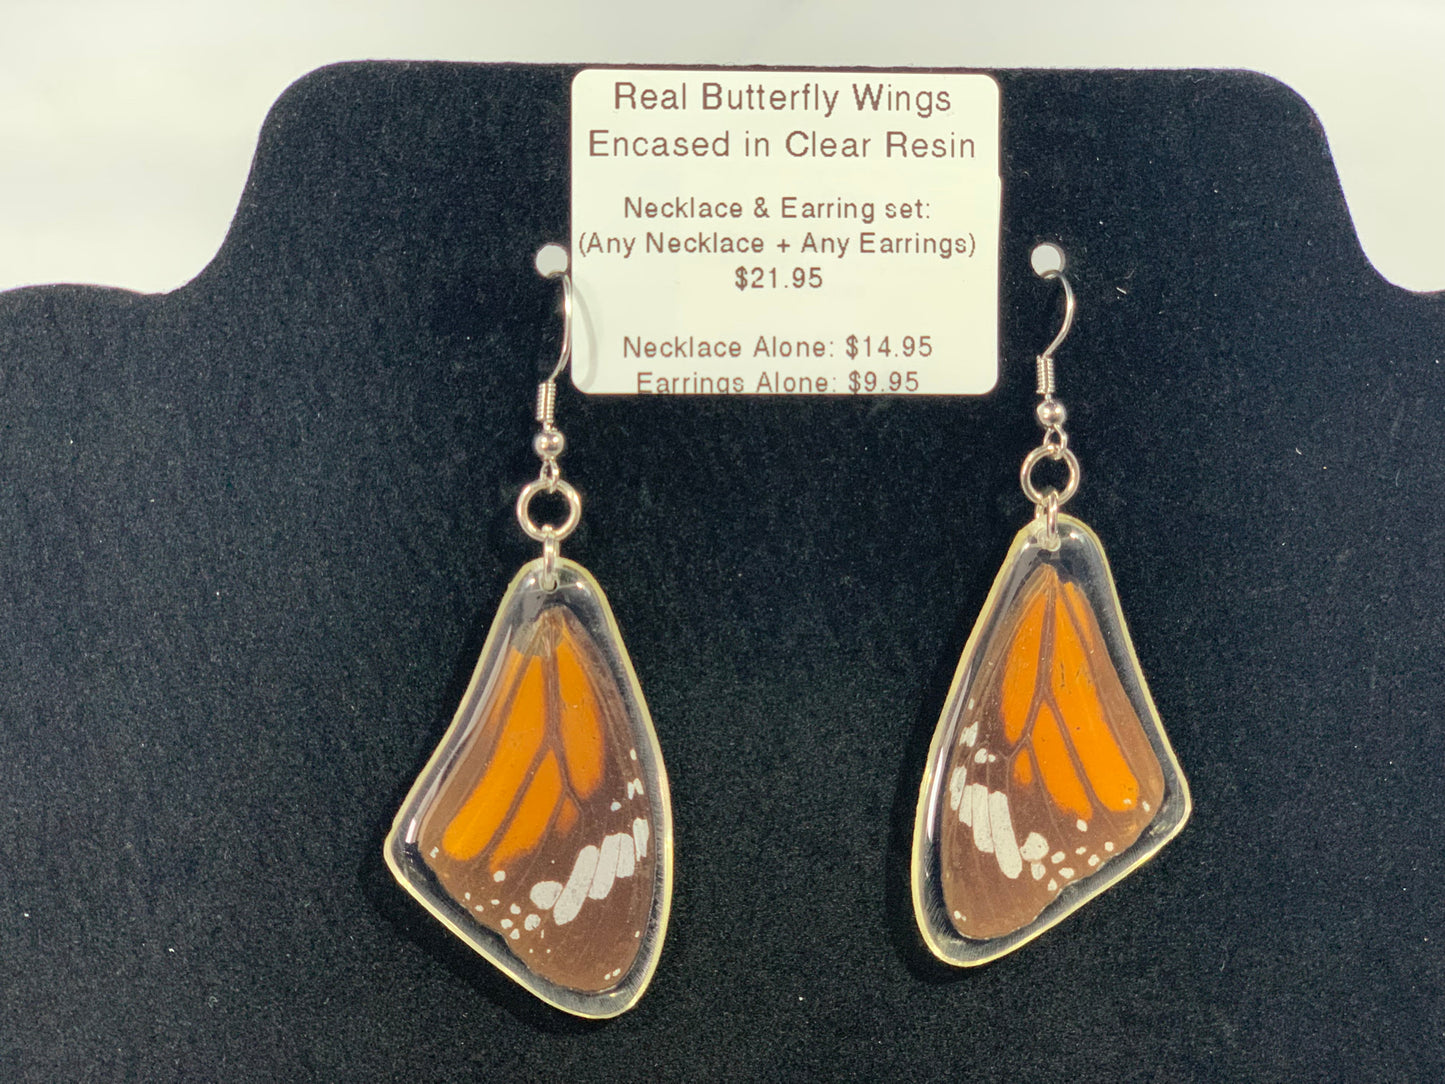 Preserved Butterfly Jewelry